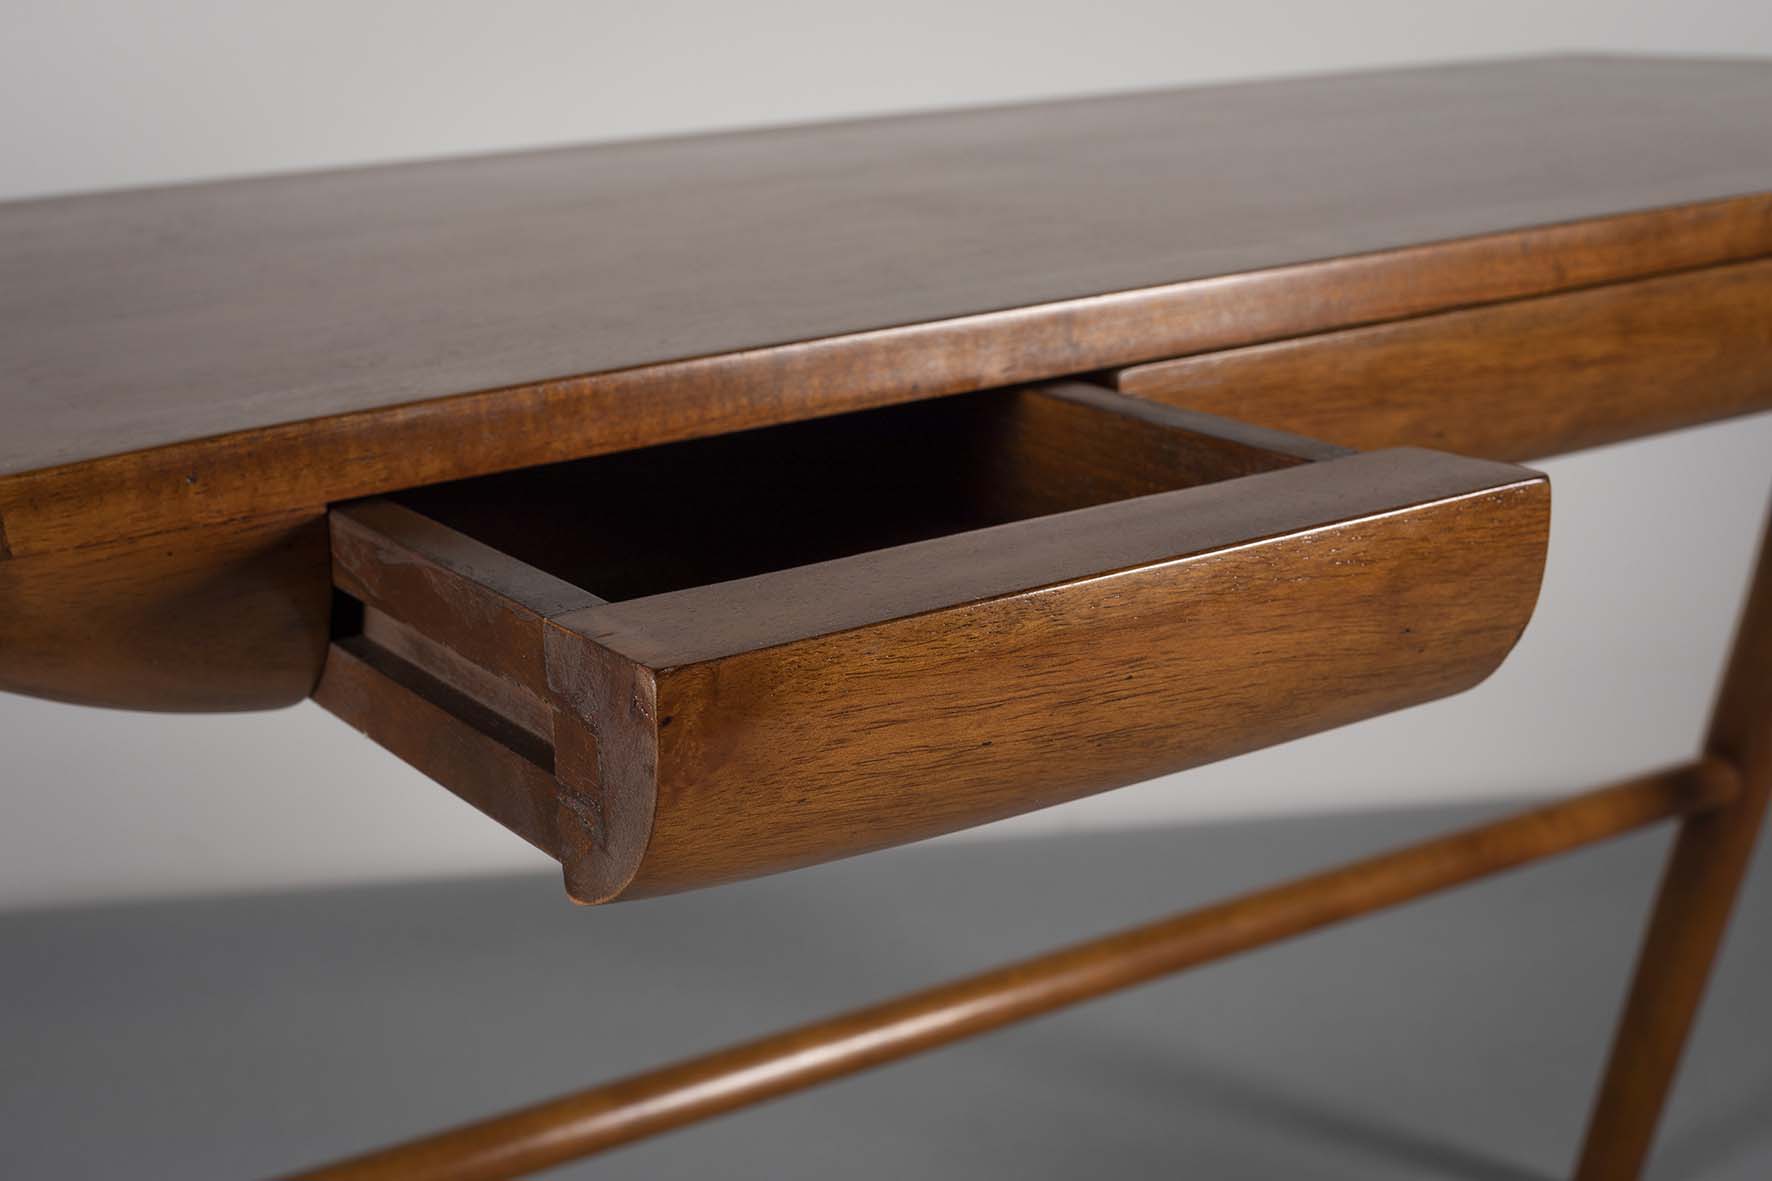 A FINE TEAK DESK, DANISH, with three cushioned frieze drawers, on tapering forked legs, joined by - Image 2 of 2